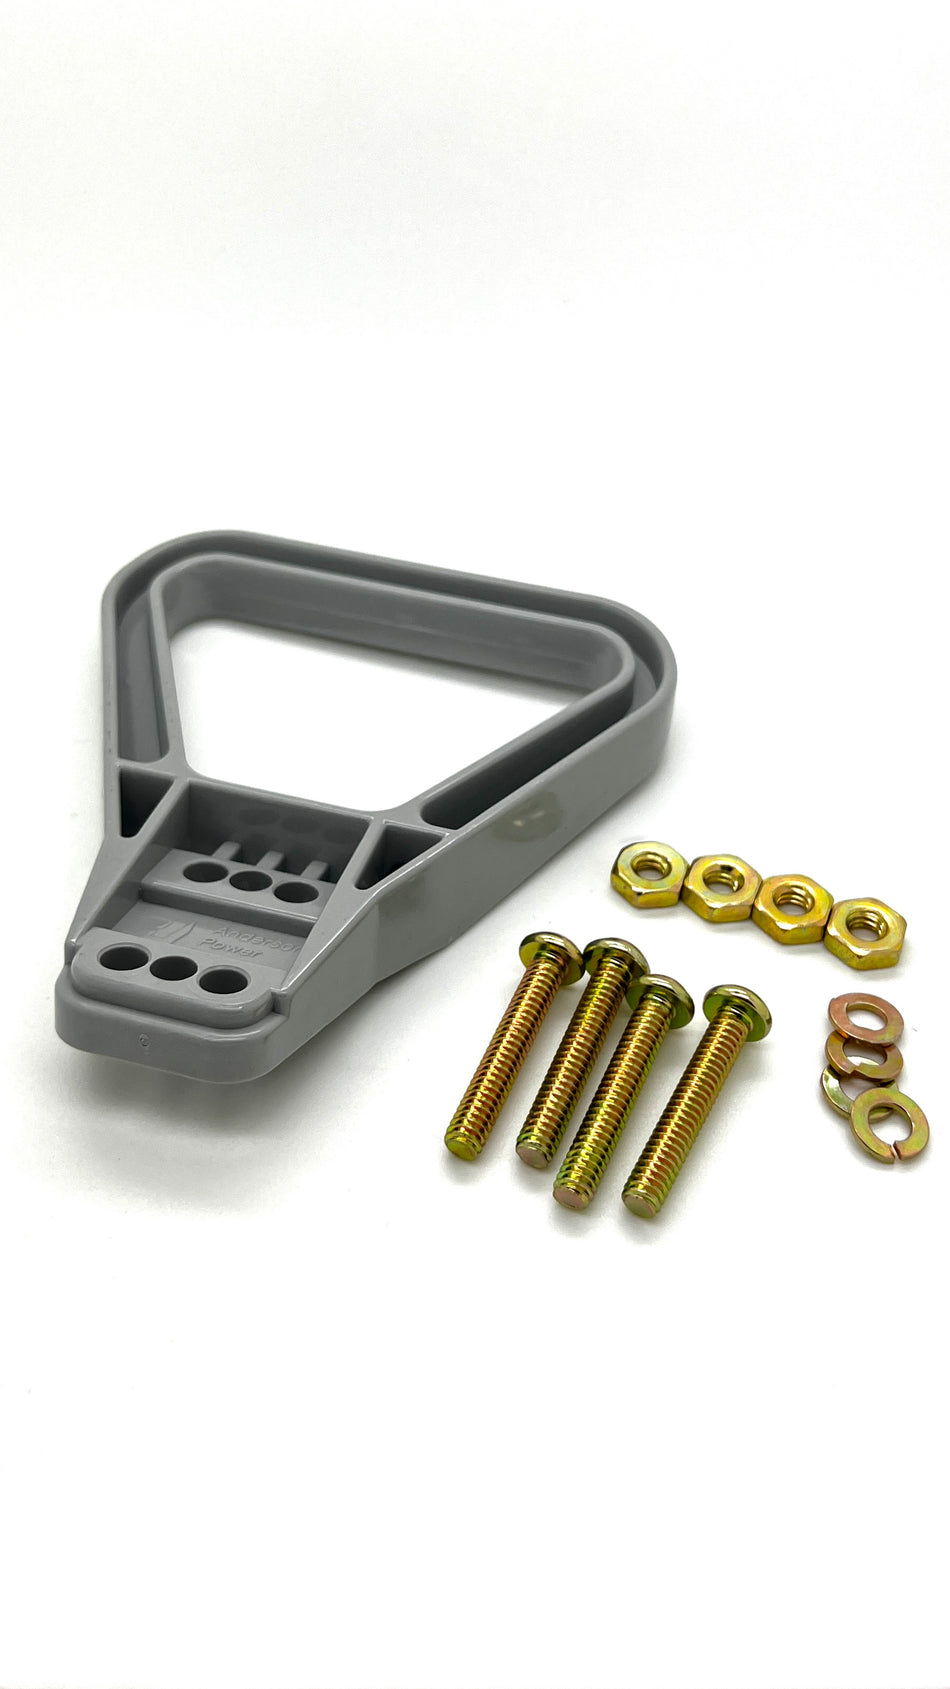 995G1 Anderson Power Products SB175 Handle Kit, Grey HANDLE with HARDWARE